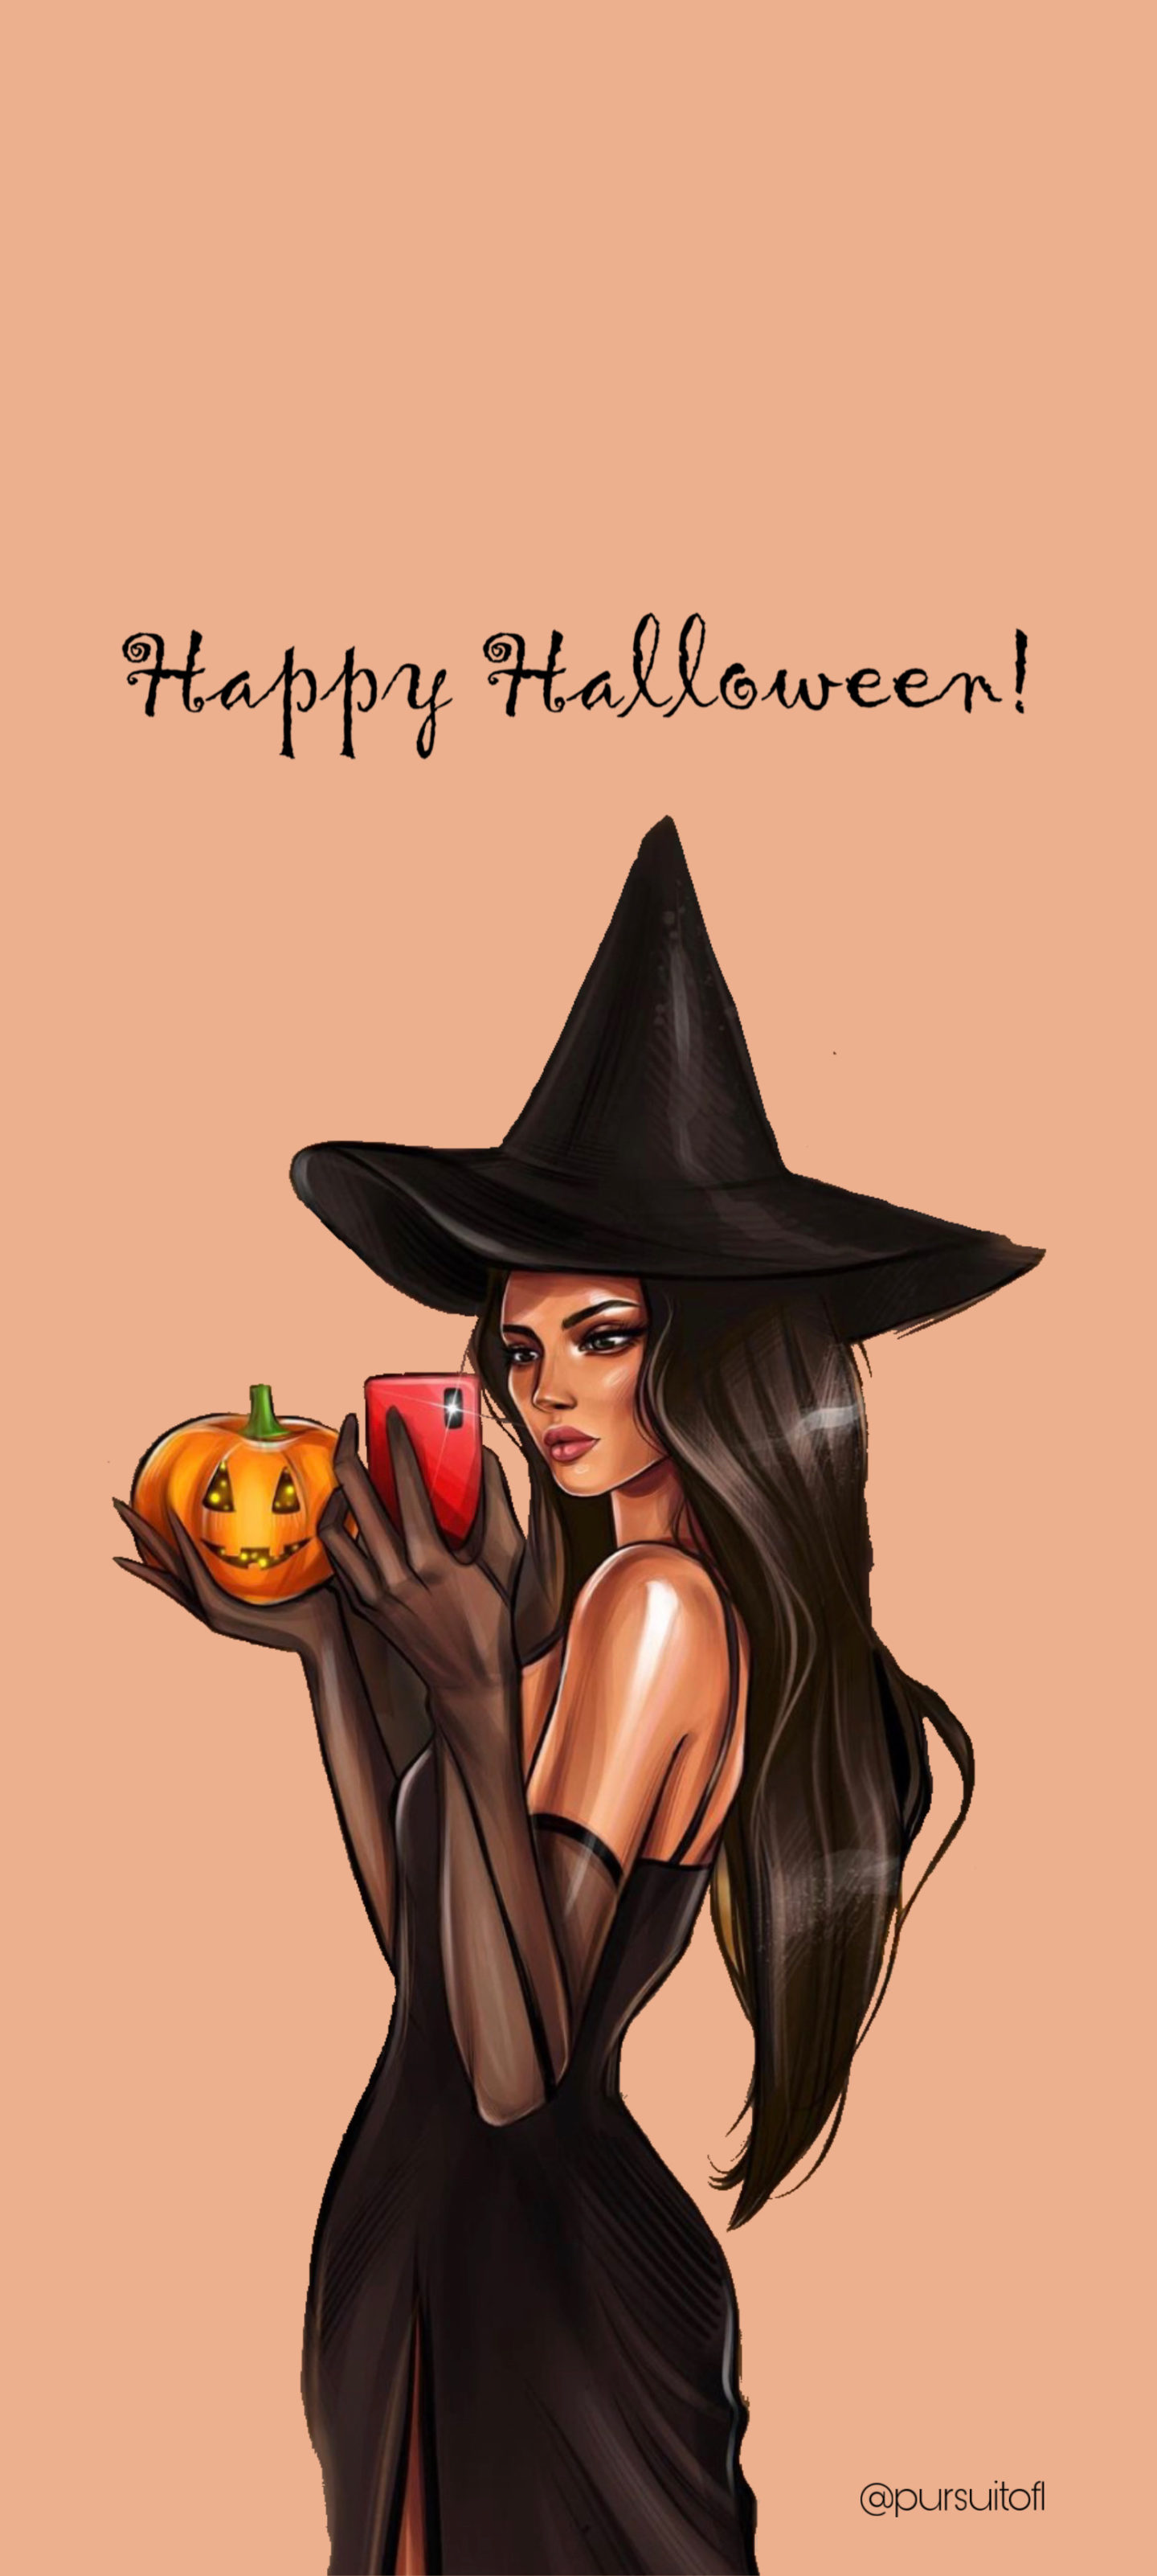 Girl Wearing Black Dress, Gloves, and Witch Hat, holding a Pumpkin taking a Selfie Phone Wallpaper with Happy Halloween Text